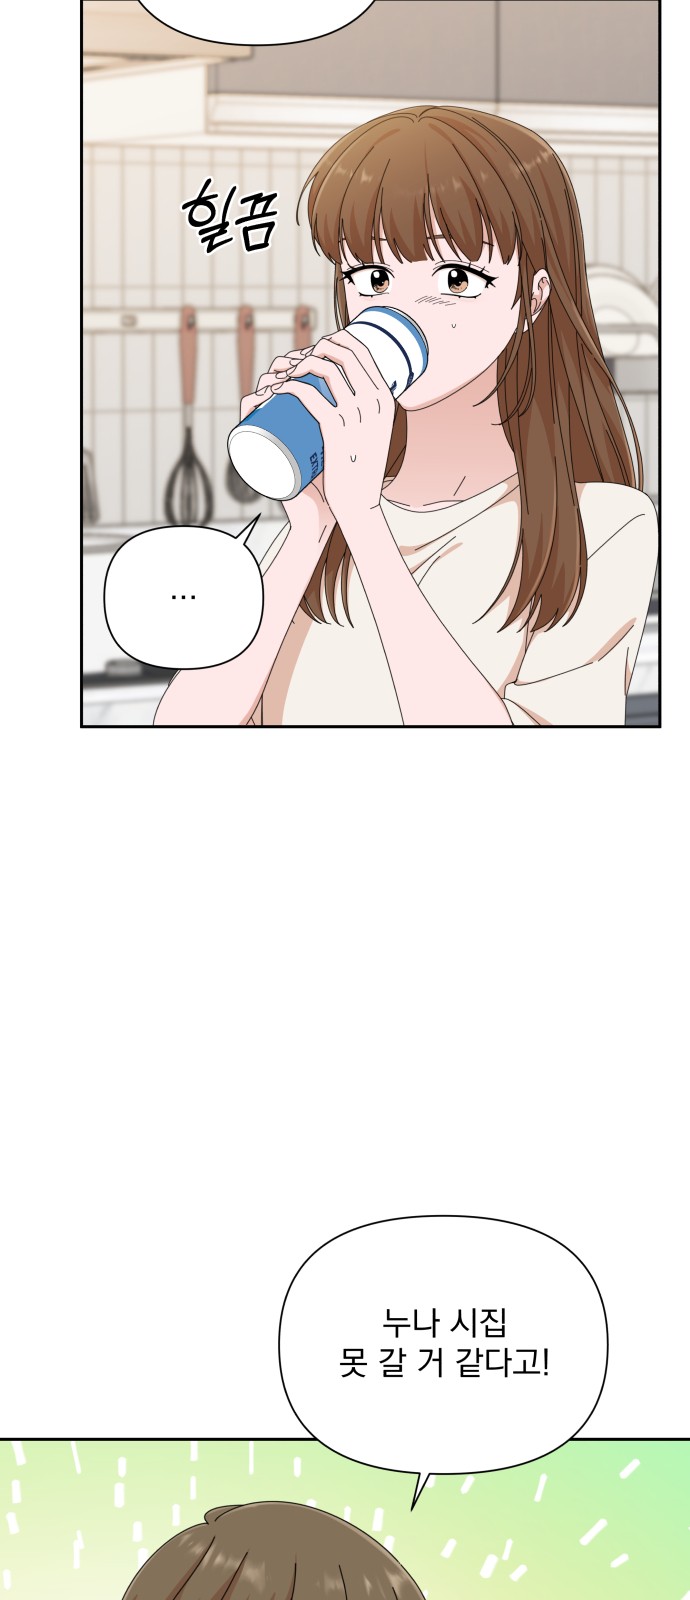 The Man With Pretty Lips - Chapter 31 - Page 3